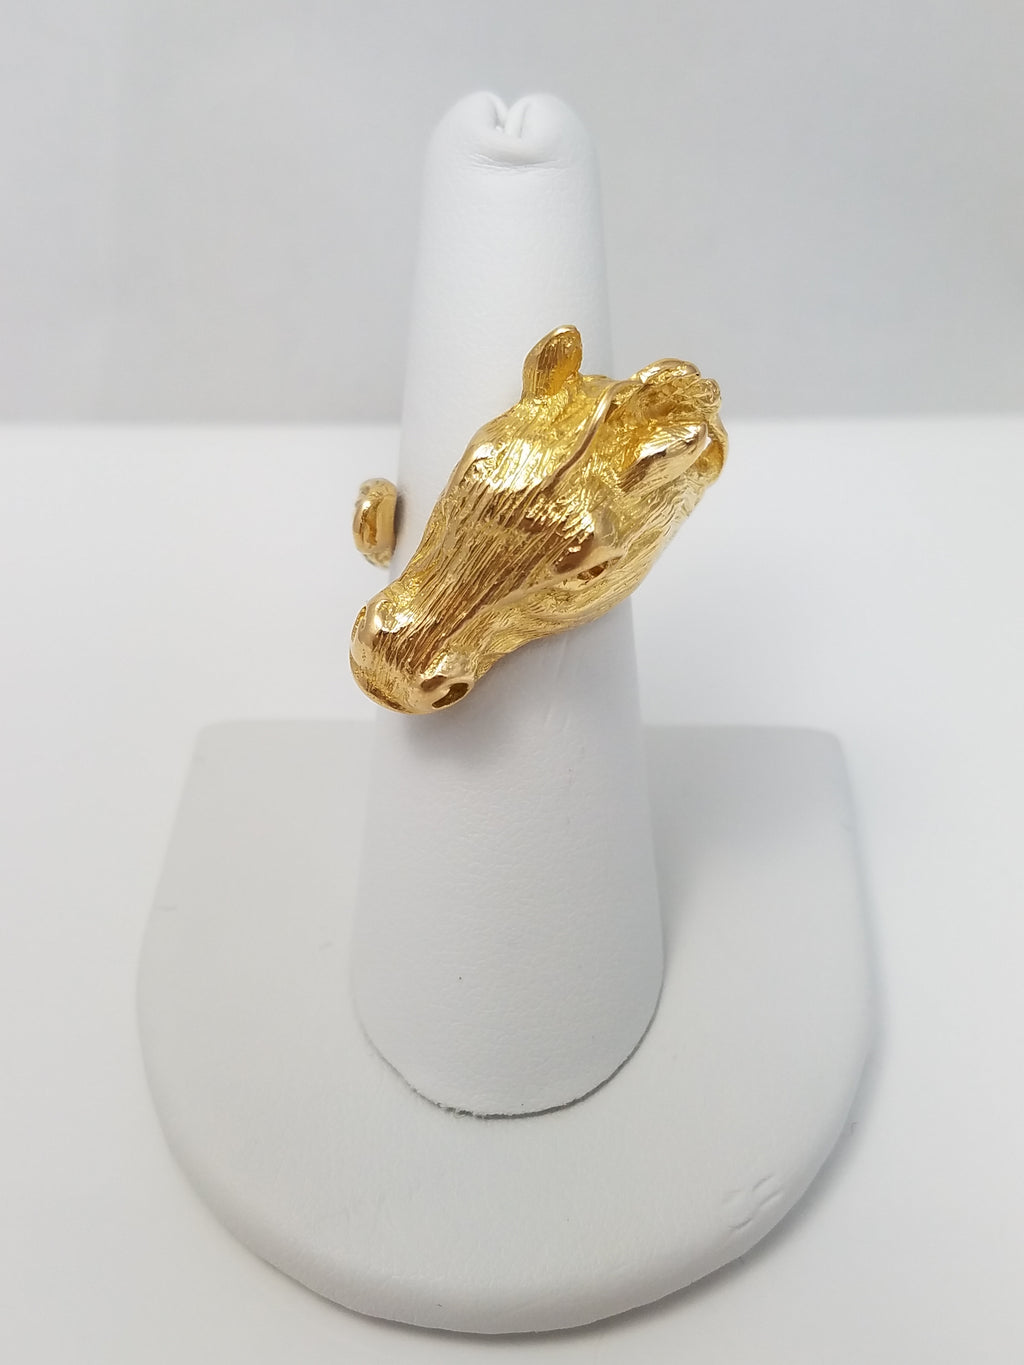 18k Yellow Gold Vintage Large Horse Head Ring